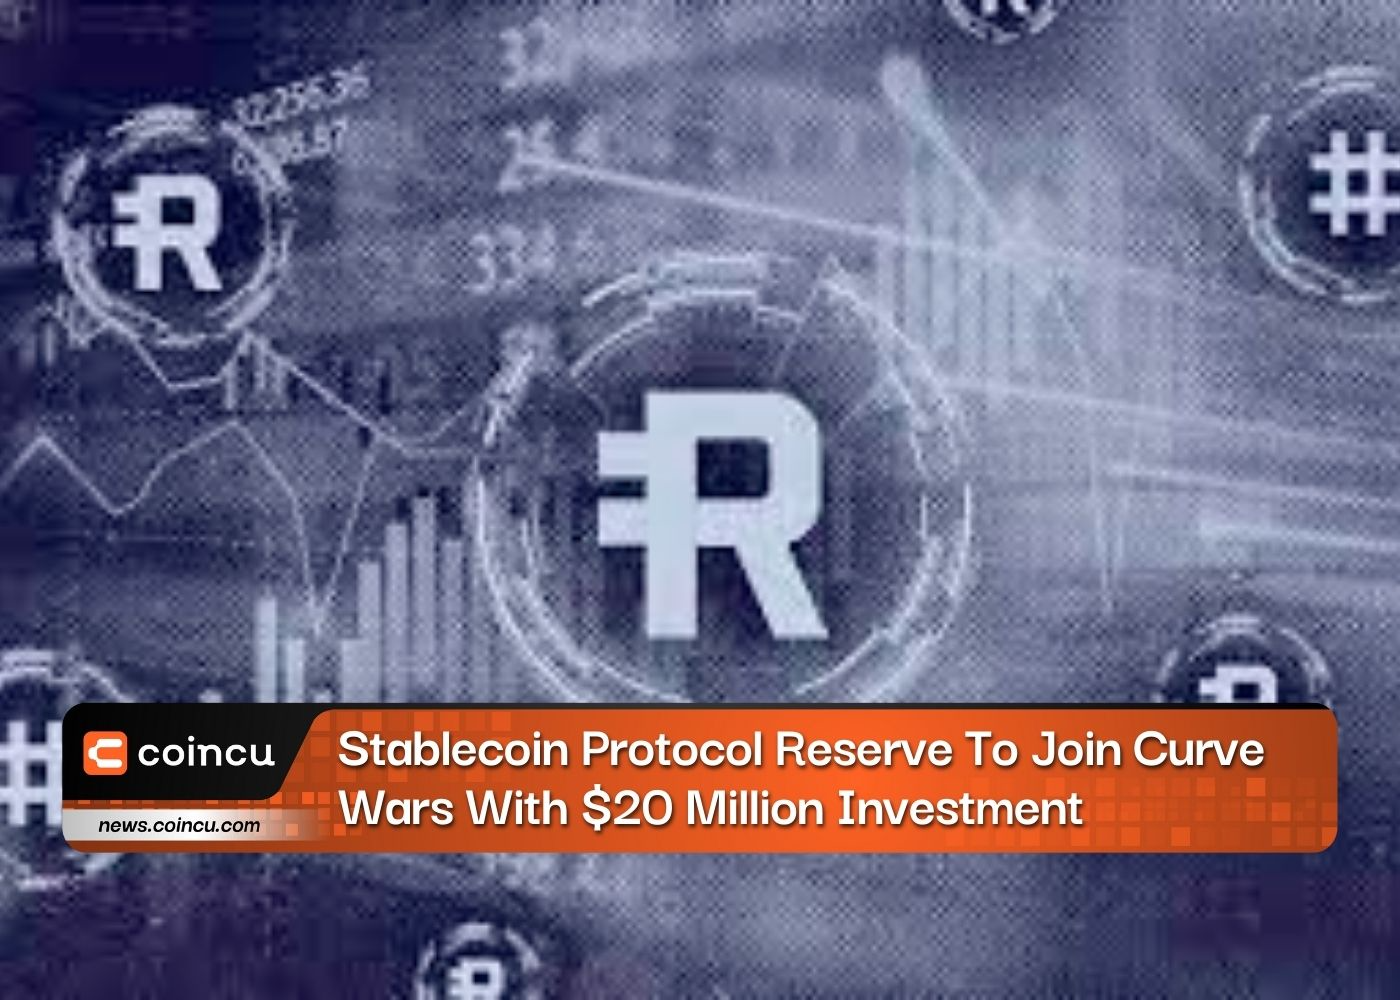 Stablecoin Protocol Reserve To Join Curve Wars With $20 Million Investment